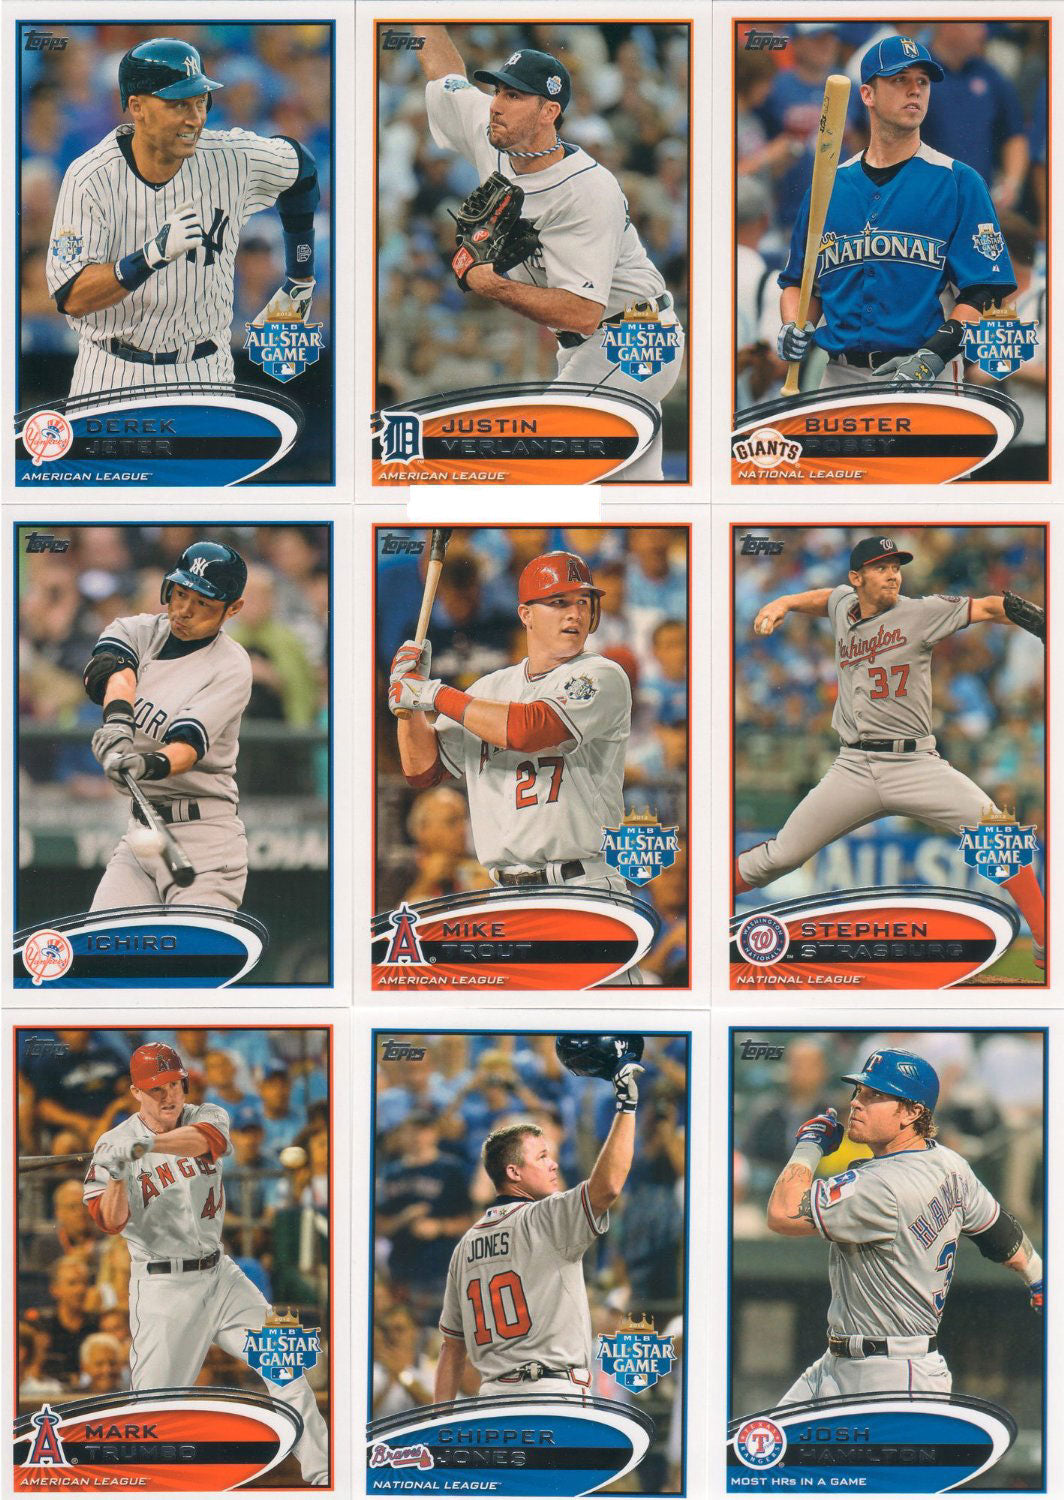 2012 Topps Traded Baseball Updates and Highlights Series Set with